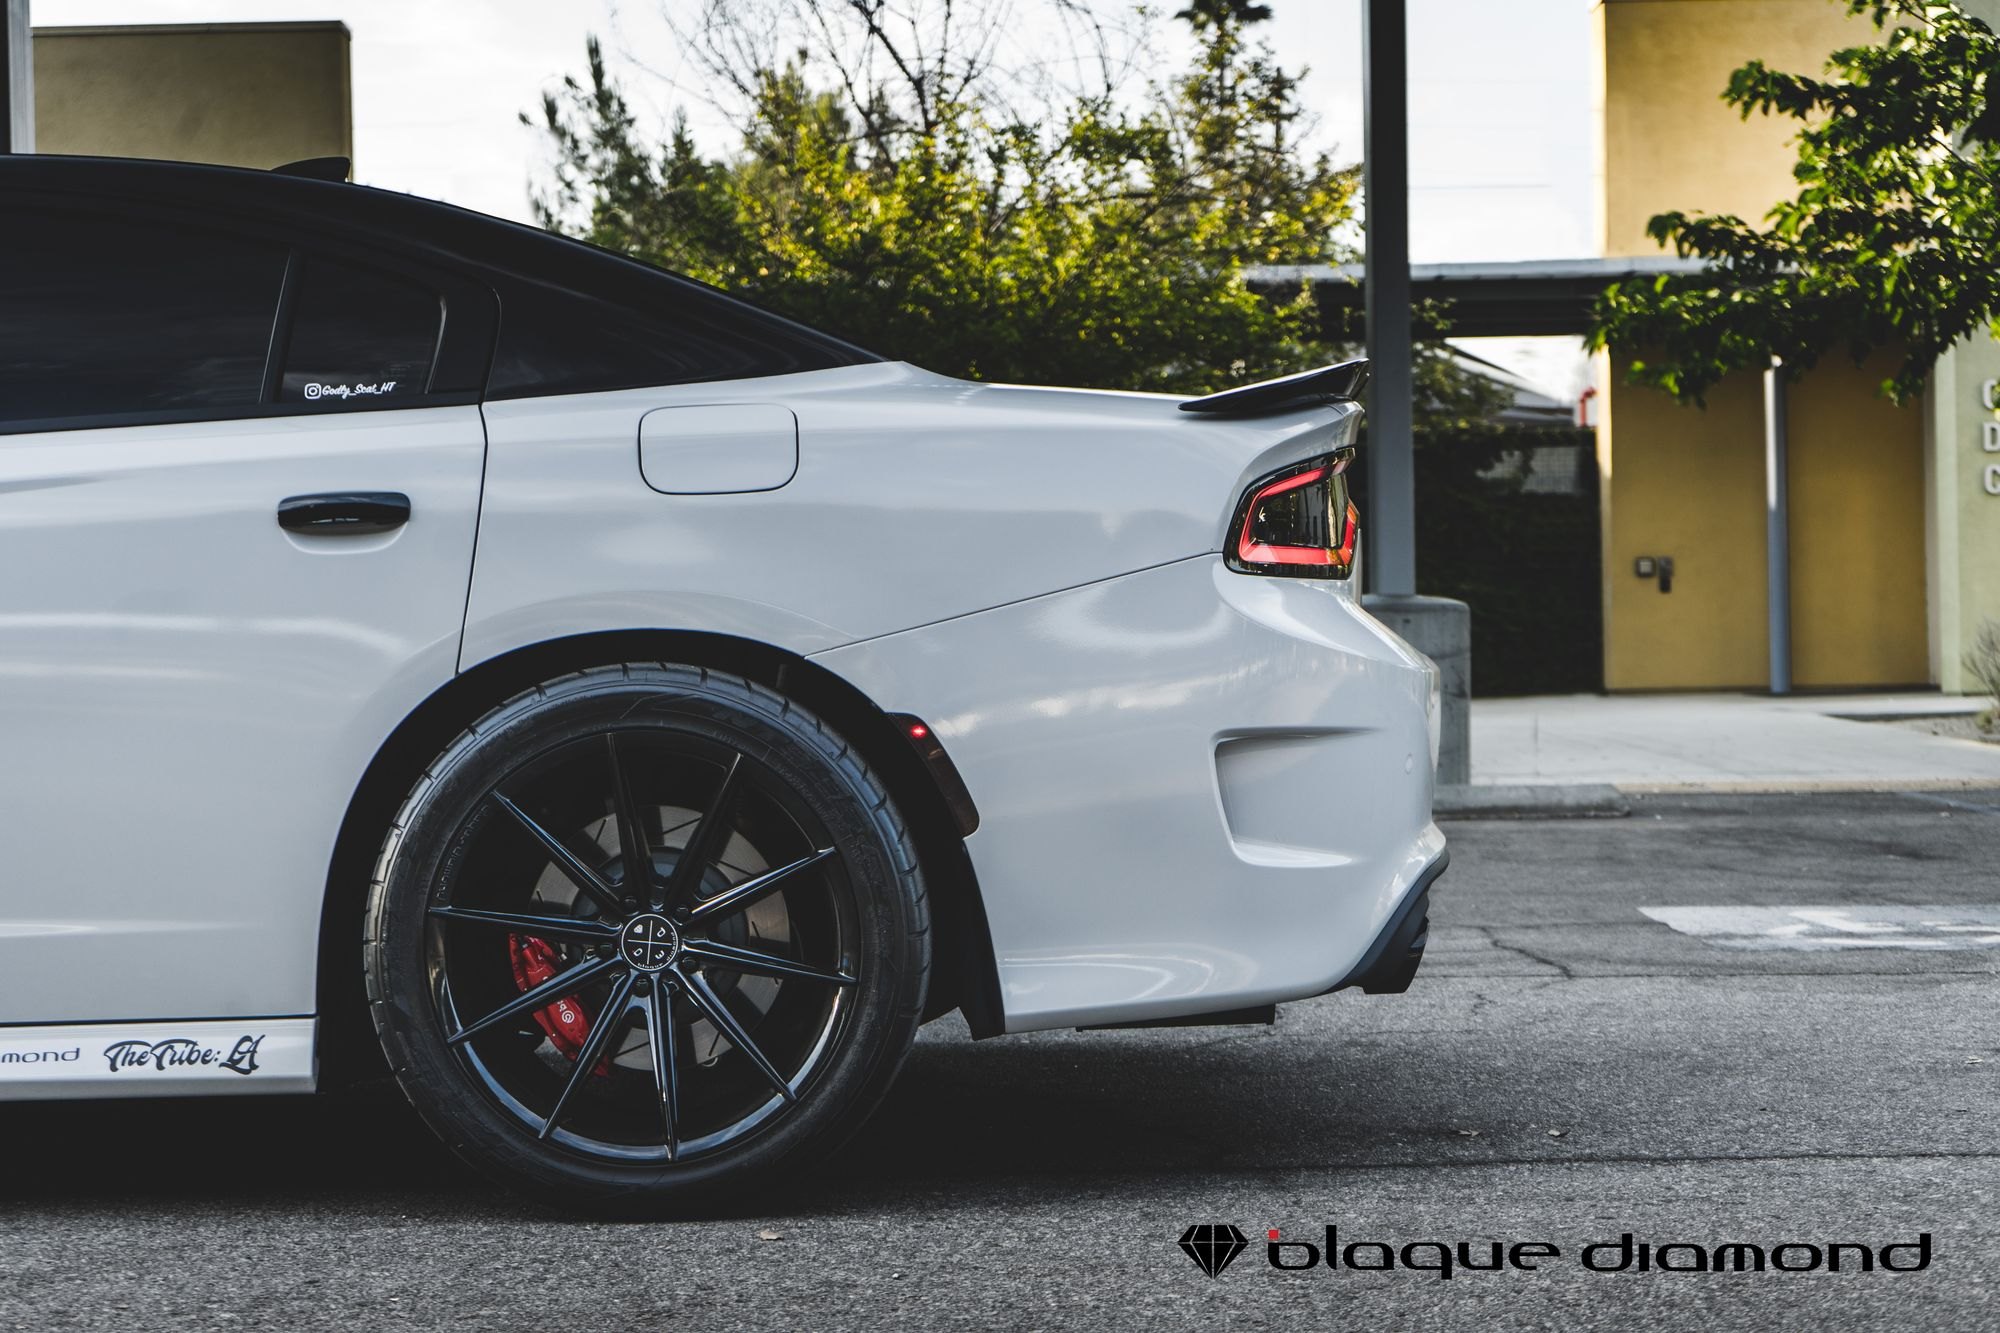 White Dodge Charger with Custom Style Rear Diffuser - Photo by Blaque Diamond